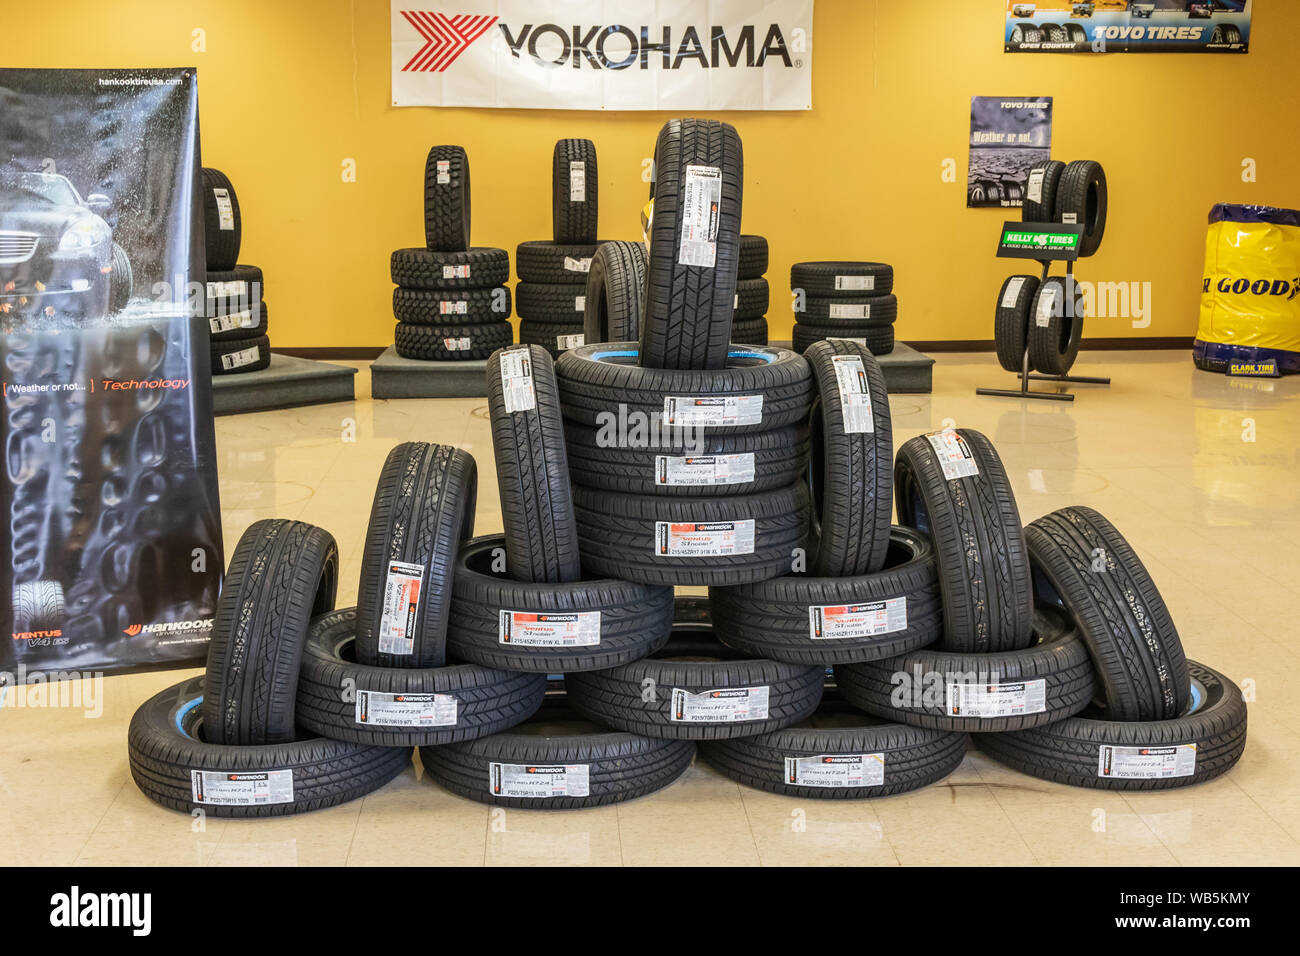 HICKORY, NC, USA-25 JUNE 2018: An interesting display of auto tires, mostly Hankook brand, on the floor of a tire and auto repair shop. Stock Photo